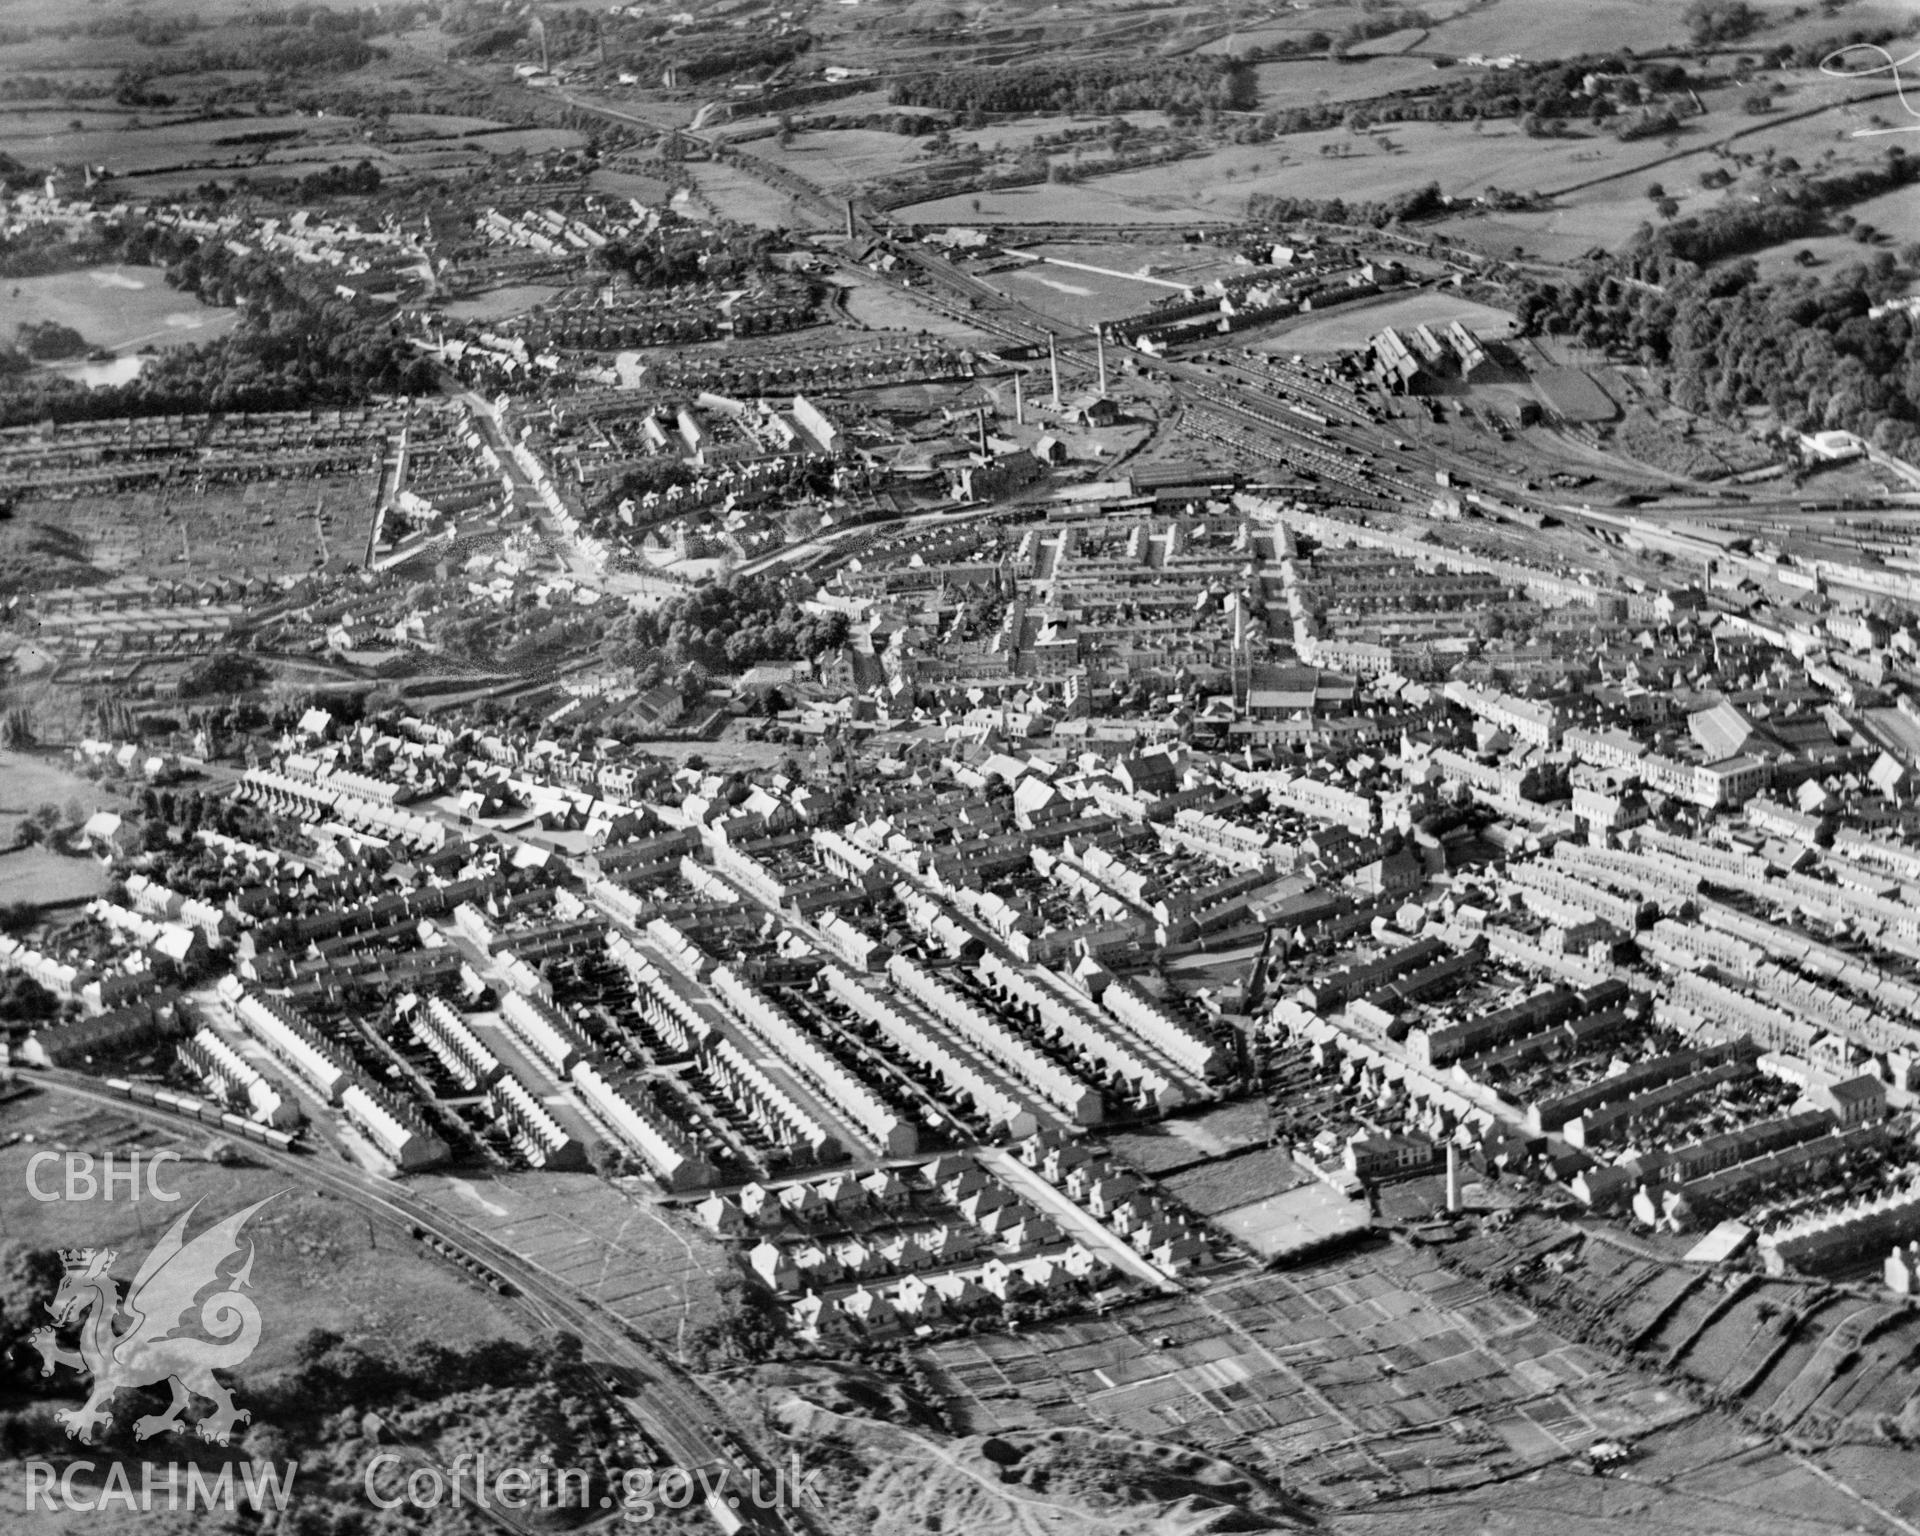 General view of Aberdare, oblique aerial view. 5?x4? black and white glass plate negative.